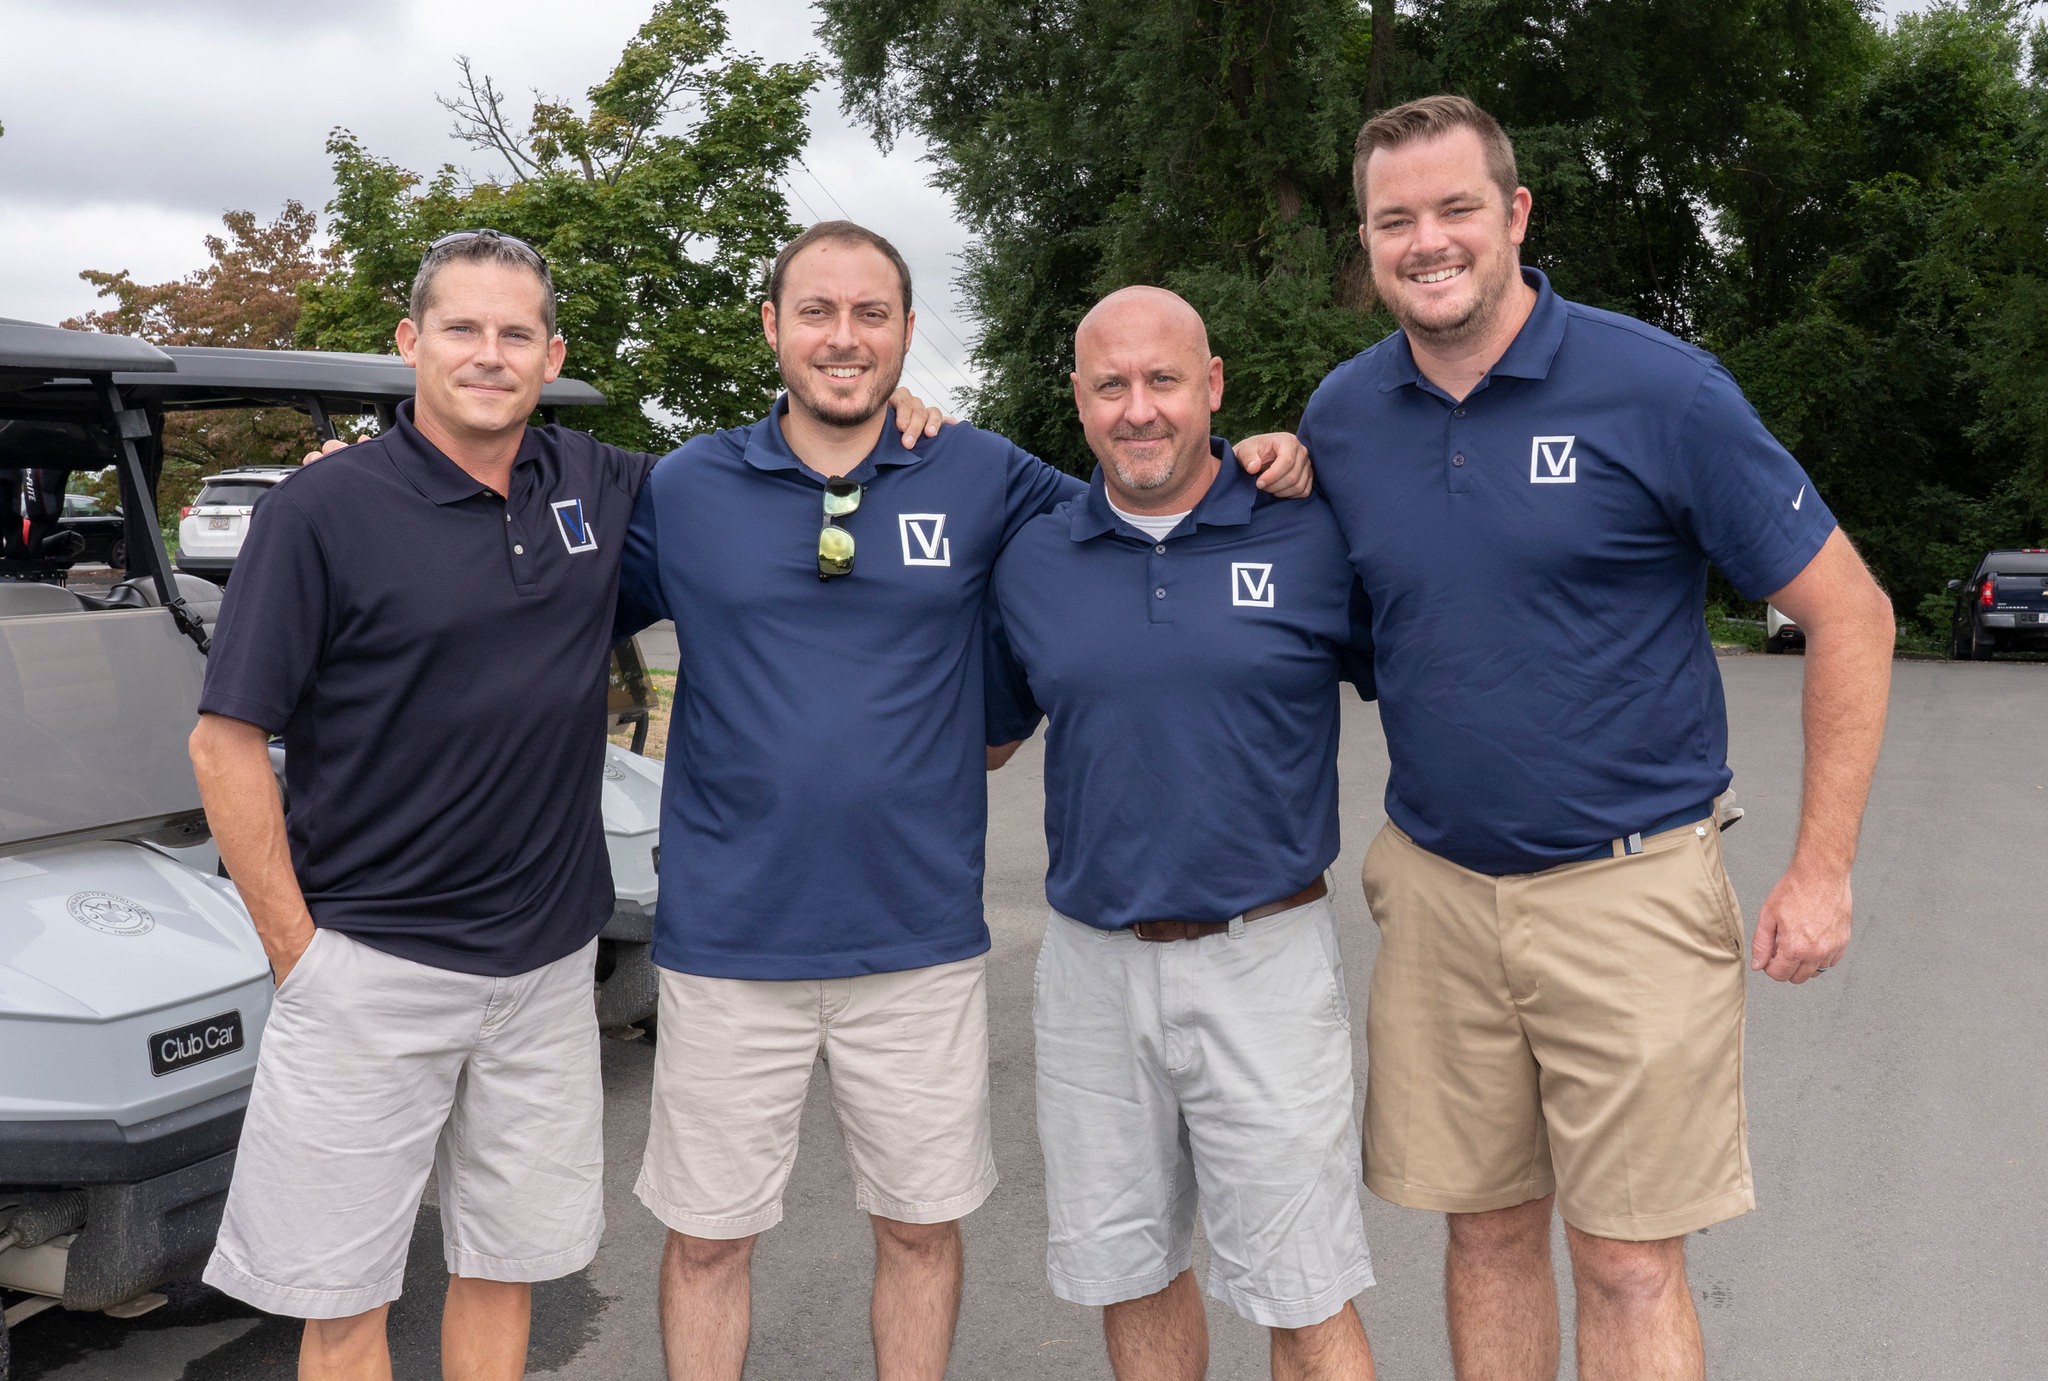 Four men wearing matching navy tees and khaki shorts, ready to get in their golf carts and play.